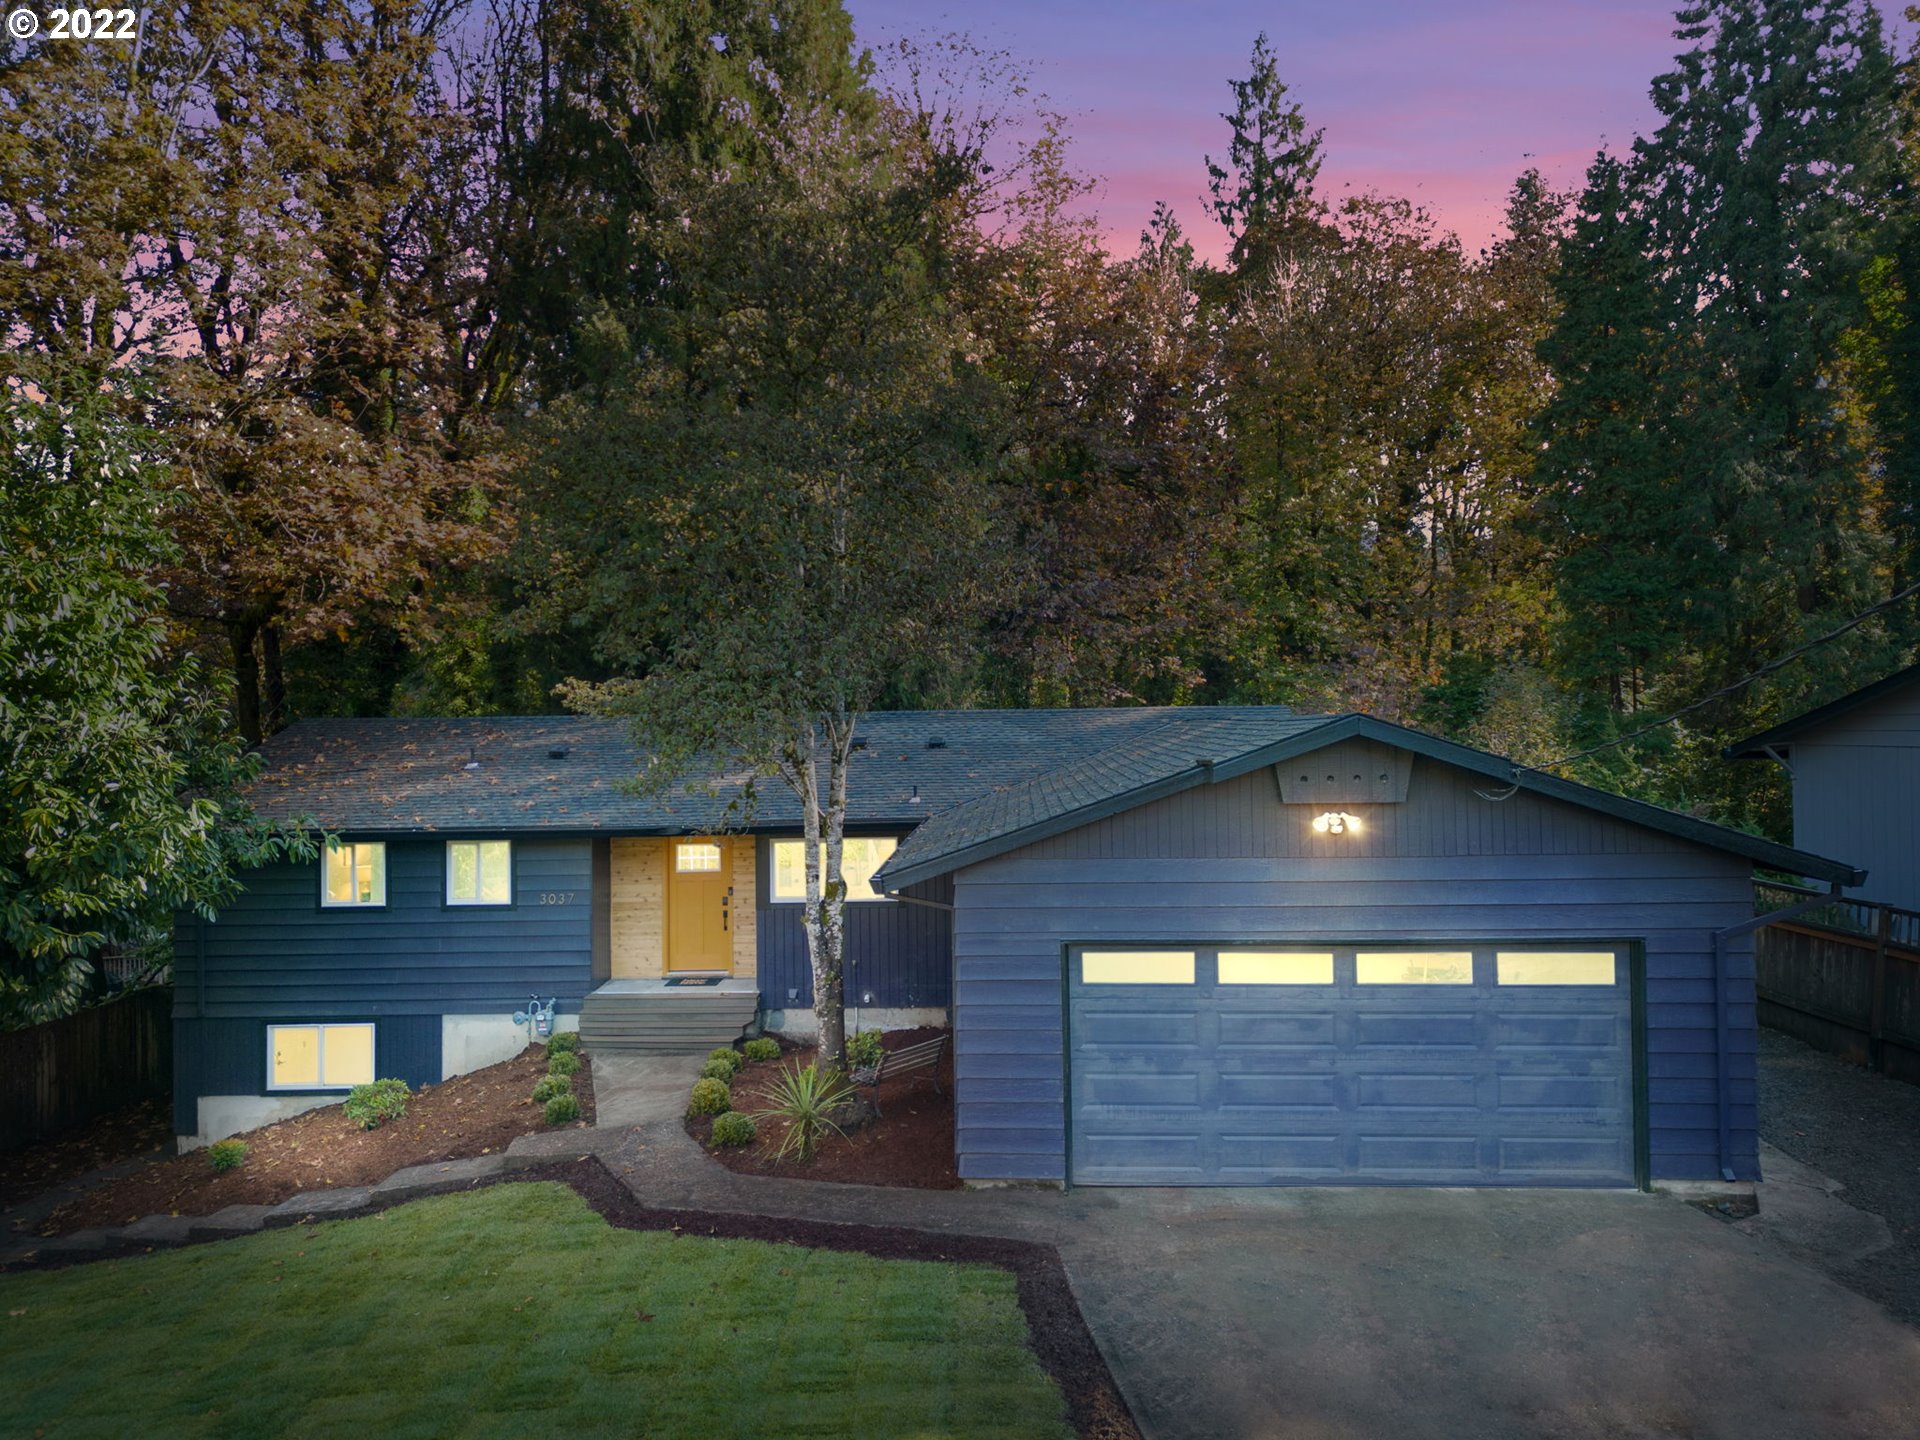 Location & setting perfection! Fully updated daylight ranch on 1/2 acre on the Lake O/West Linn line! 1/4 mi to the Willamette River on a deep wooded lot, this 4/3 plus office/bonus/5th bd is perfect for a growing family, multi-gen, ADU potential, or office space for in person client meetings! Pvt ext entrance on lwr, new top to bottom- flooring, kitchen, appliances, bathrooms, windows, hvac, lighting, fixtures, paint, garage door, back deck, sod & gas line. Peace & privacy in a prime locale!